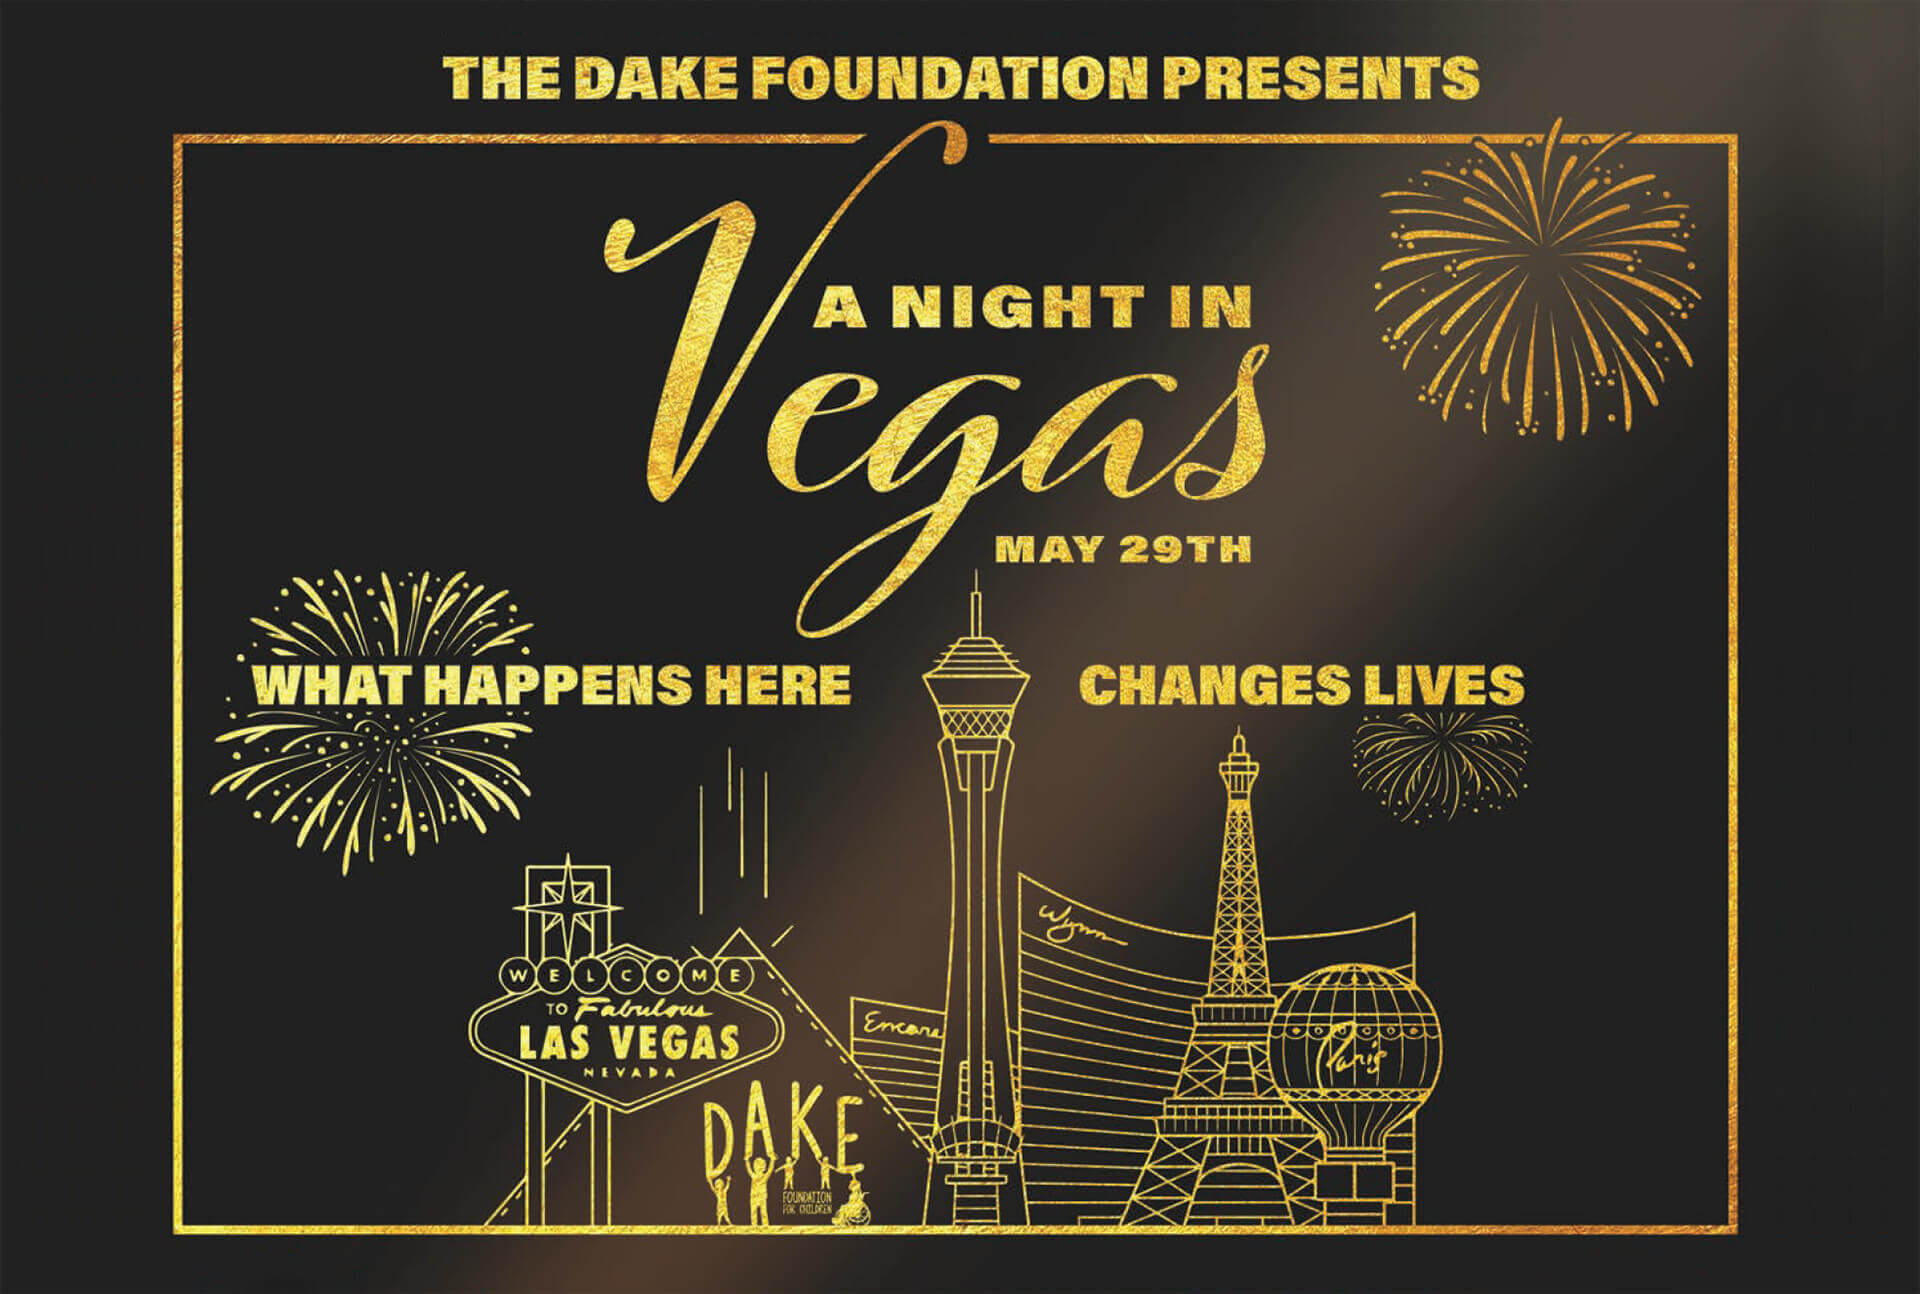 Dake Foundation Child's Play: A Night in Vegas is May 29th